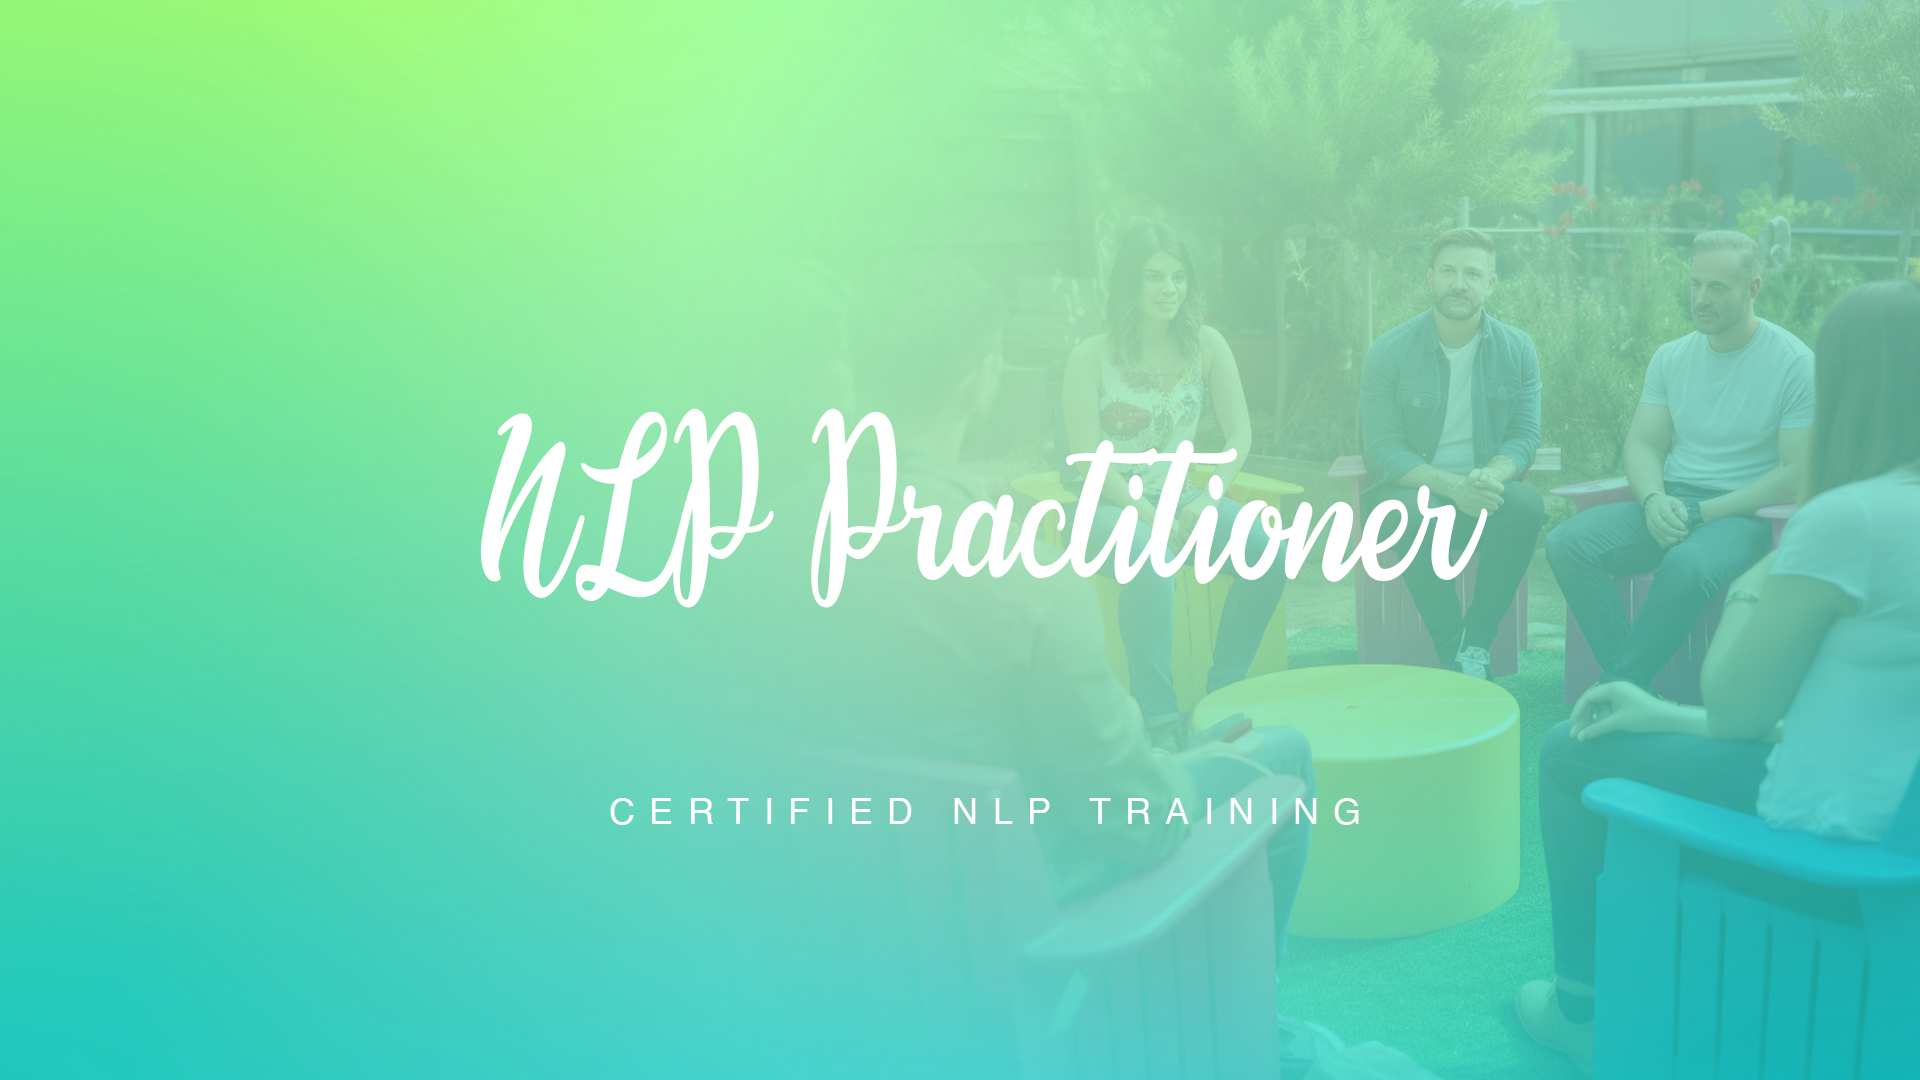 Mastering People Skills with NLP